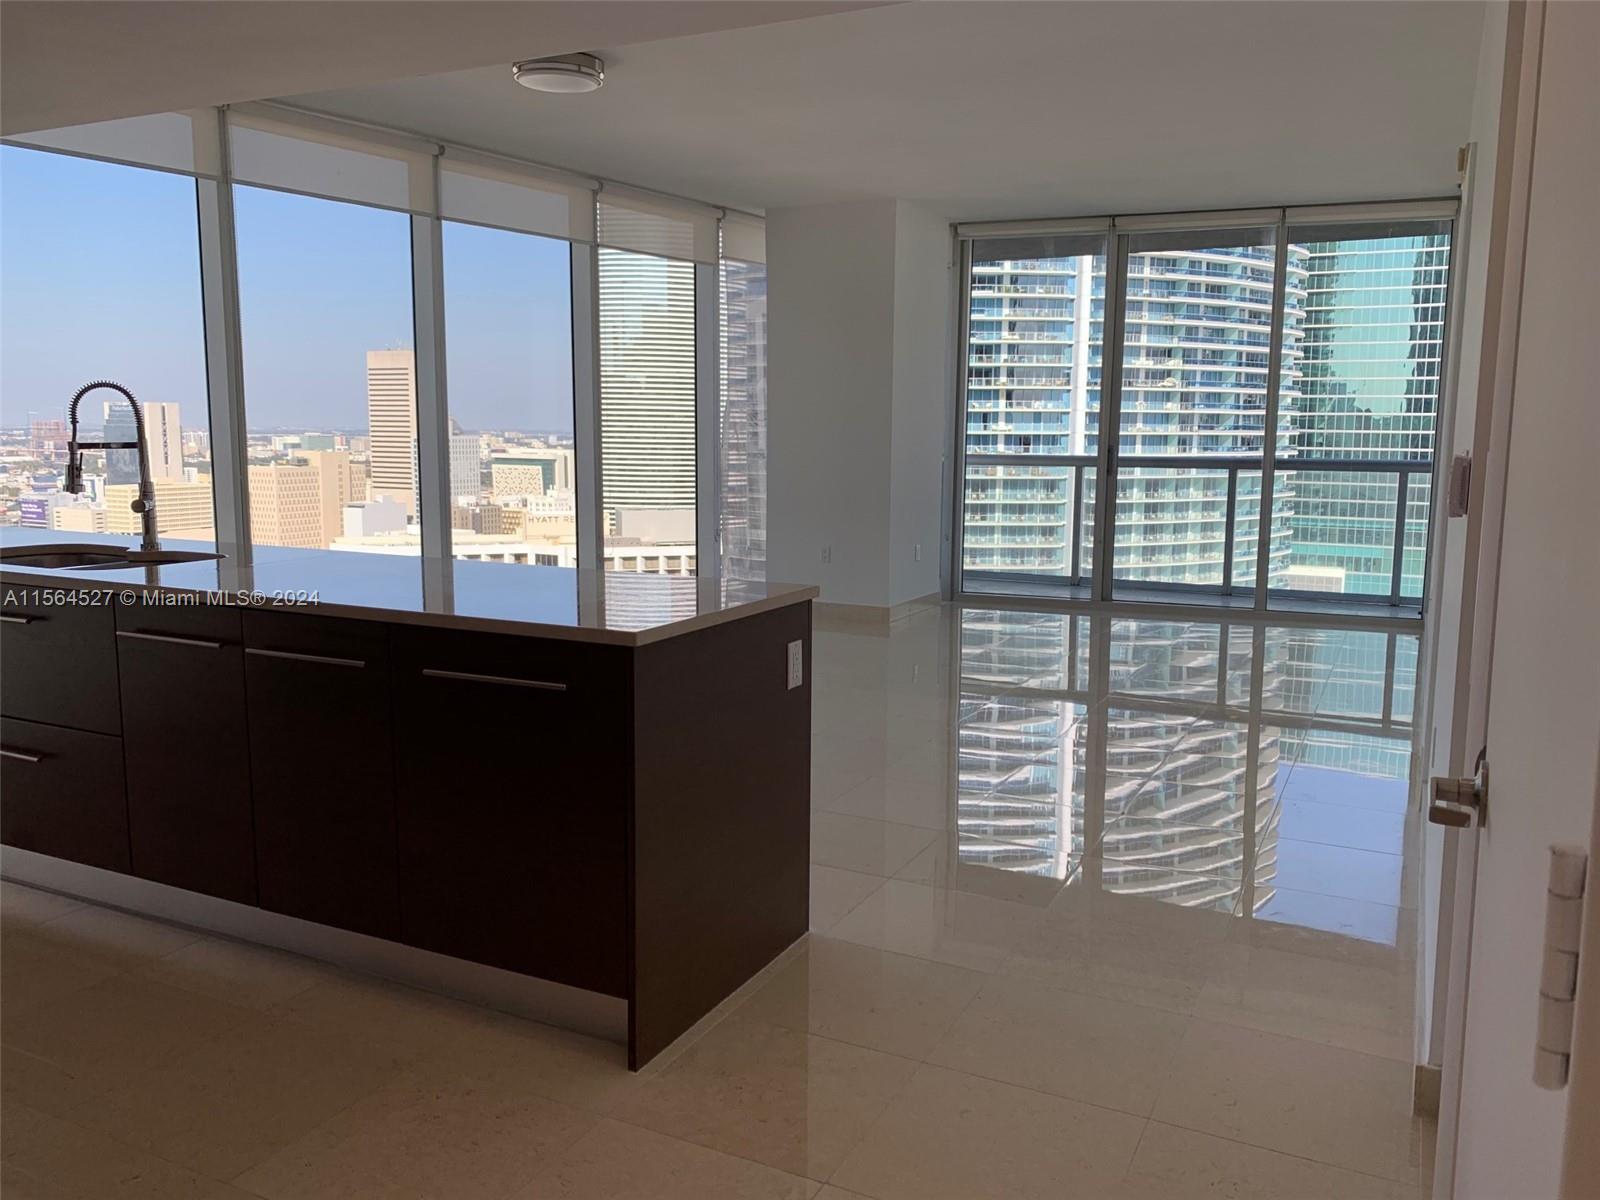 Spectacular 2B/2B corner unit at the prestigious and luxury Icon Brickell, designed by Philippe Stark and built in 2008. This unit has amazing views of the Downtown Miami and Miami River. Marble floors in the entire unit including the balcony, open kitchen with top brand appliances and upgraded glossy white doors. Amenities including three pools, 5 stars spa, fitness center with a spinning room, sauna, steam room, on-site fine-dining options, valet parking, 24 hours concierge, and much more. Steps to Brickell City Center, and many restaurants and bars in the Brickell and Downtown area. Great location!!!